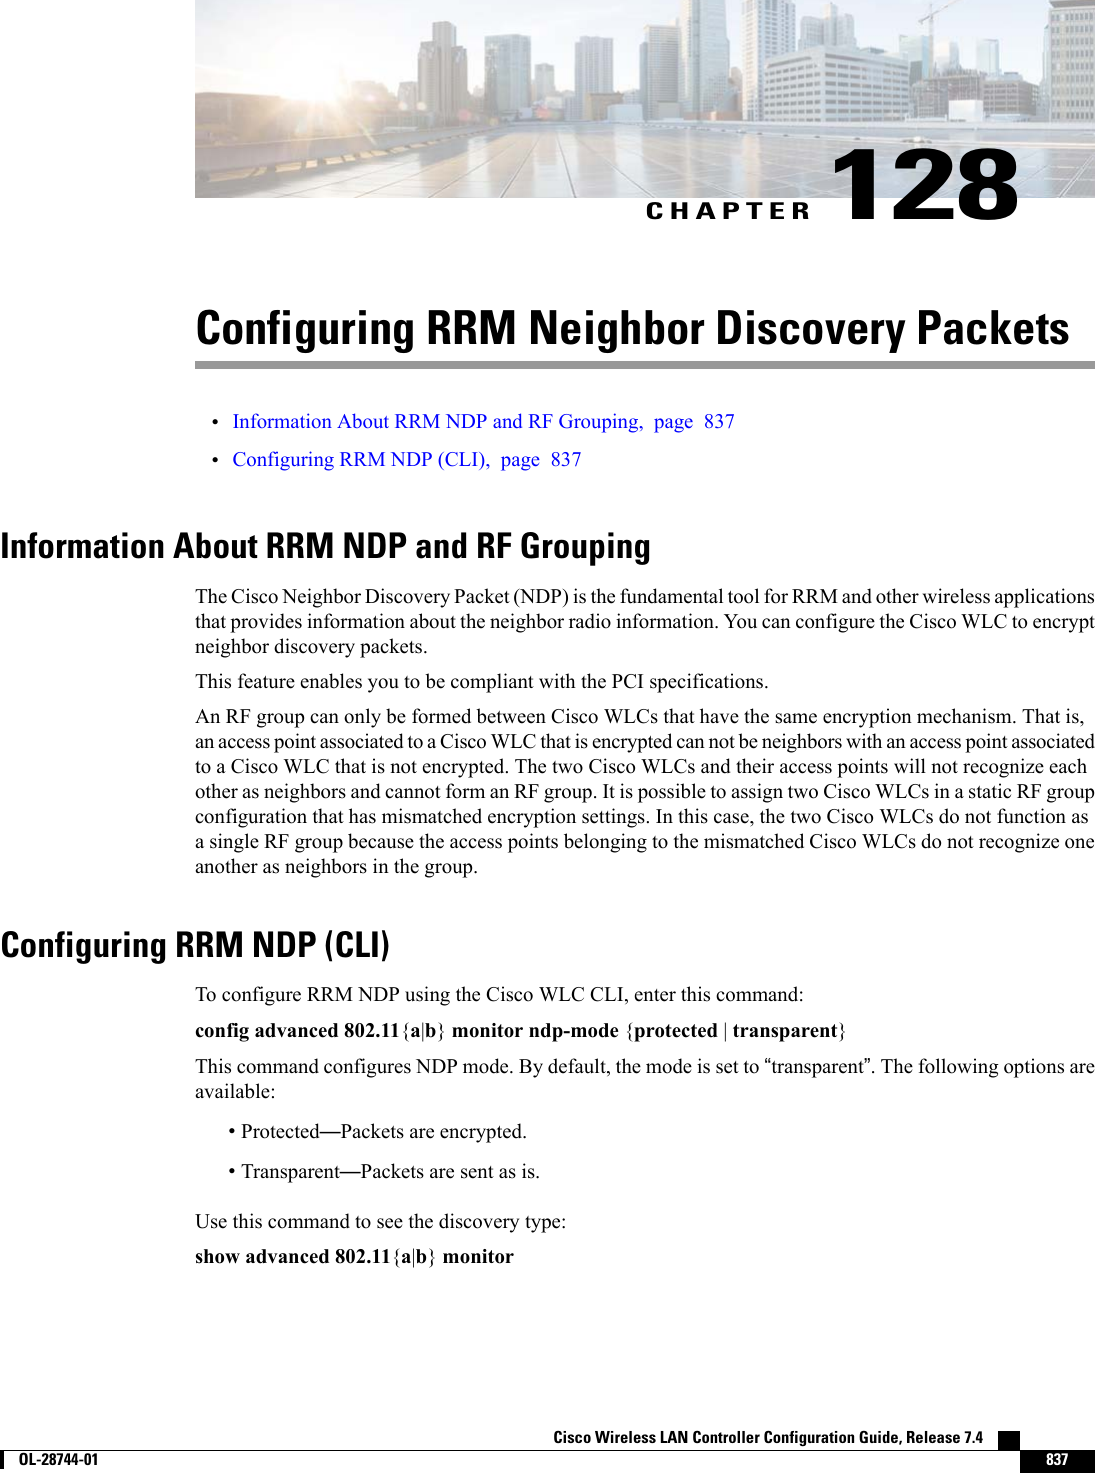 CHAPTER 128Configuring RRM Neighbor Discovery Packets•Information About RRM NDP and RF Grouping, page 837•Configuring RRM NDP (CLI), page 837Information About RRM NDP and RF GroupingThe Cisco Neighbor Discovery Packet (NDP) is the fundamental tool for RRM and other wireless applicationsthat provides information about the neighbor radio information. You can configure the Cisco WLC to encryptneighbor discovery packets.This feature enables you to be compliant with the PCI specifications.An RF group can only be formed between Cisco WLCs that have the same encryption mechanism. That is,an access point associated to a Cisco WLC that is encrypted can not be neighbors with an access point associatedto a Cisco WLC that is not encrypted. The two Cisco WLCs and their access points will not recognize eachother as neighbors and cannot form an RF group. It is possible to assign two Cisco WLCs in a static RF groupconfiguration that has mismatched encryption settings. In this case, the two Cisco WLCs do not function asa single RF group because the access points belonging to the mismatched Cisco WLCs do not recognize oneanother as neighbors in the group.Configuring RRM NDP (CLI)To configure RRM NDP using the Cisco WLC CLI, enter this command:config advanced 802.11{a|b}monitor ndp-mode {protected |transparent}This command configures NDP mode. By default, the mode is set to “transparent”. The following options areavailable:•Protected—Packets are encrypted.•Transparent—Packets are sent as is.Use this command to see the discovery type:show advanced 802.11{a|b}monitorCisco Wireless LAN Controller Configuration Guide, Release 7.4        OL-28744-01 837